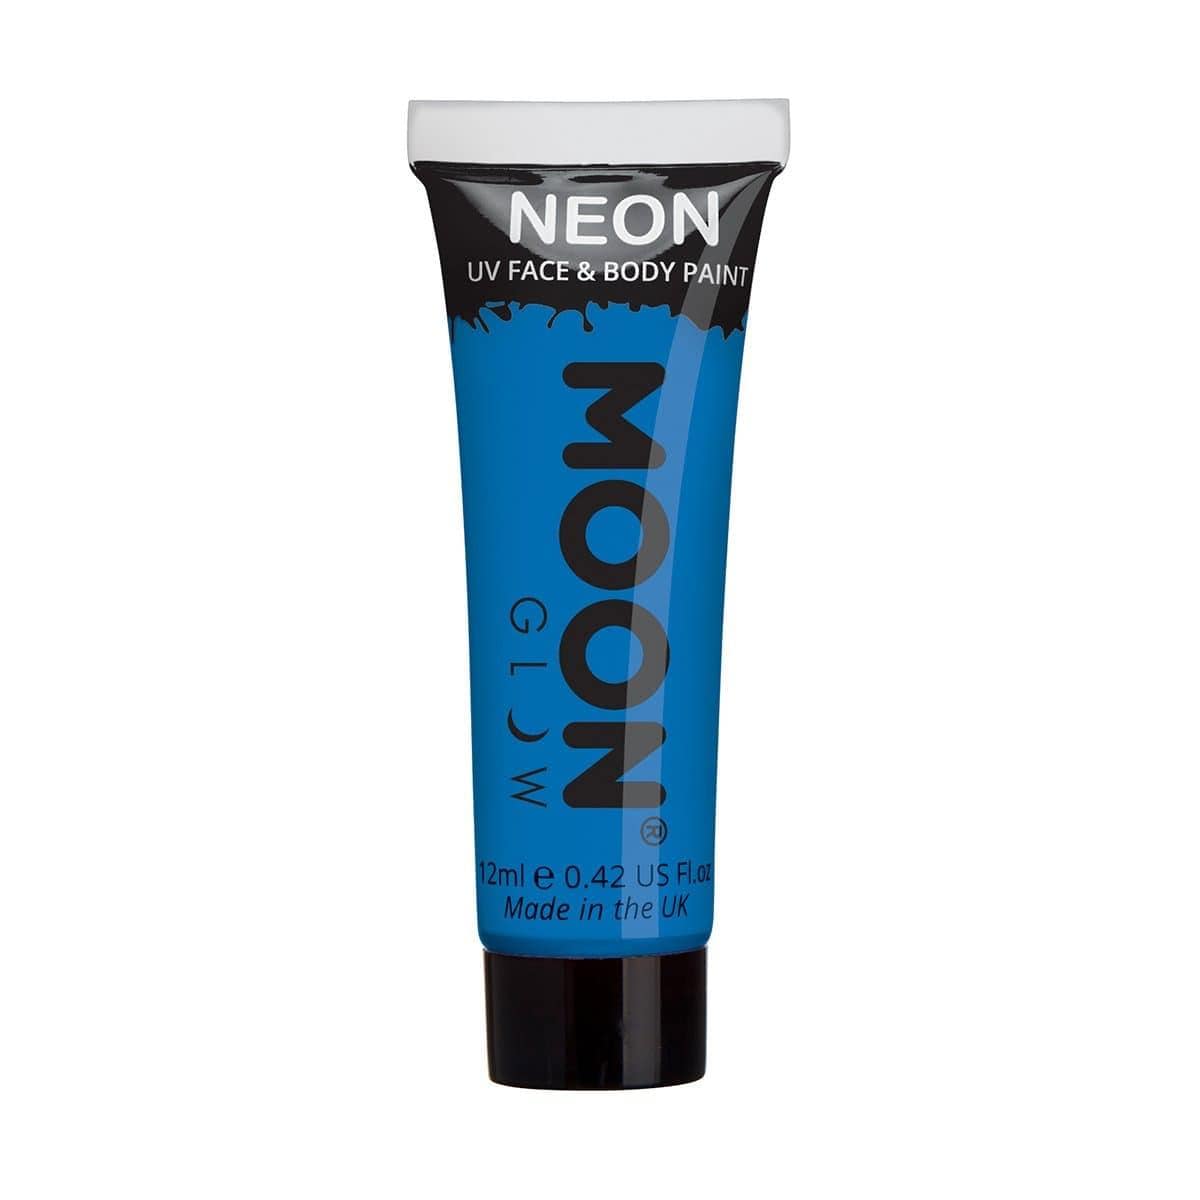 Buy Costume Accessories Moon blue neon UV face & body paint sold at Party Expert